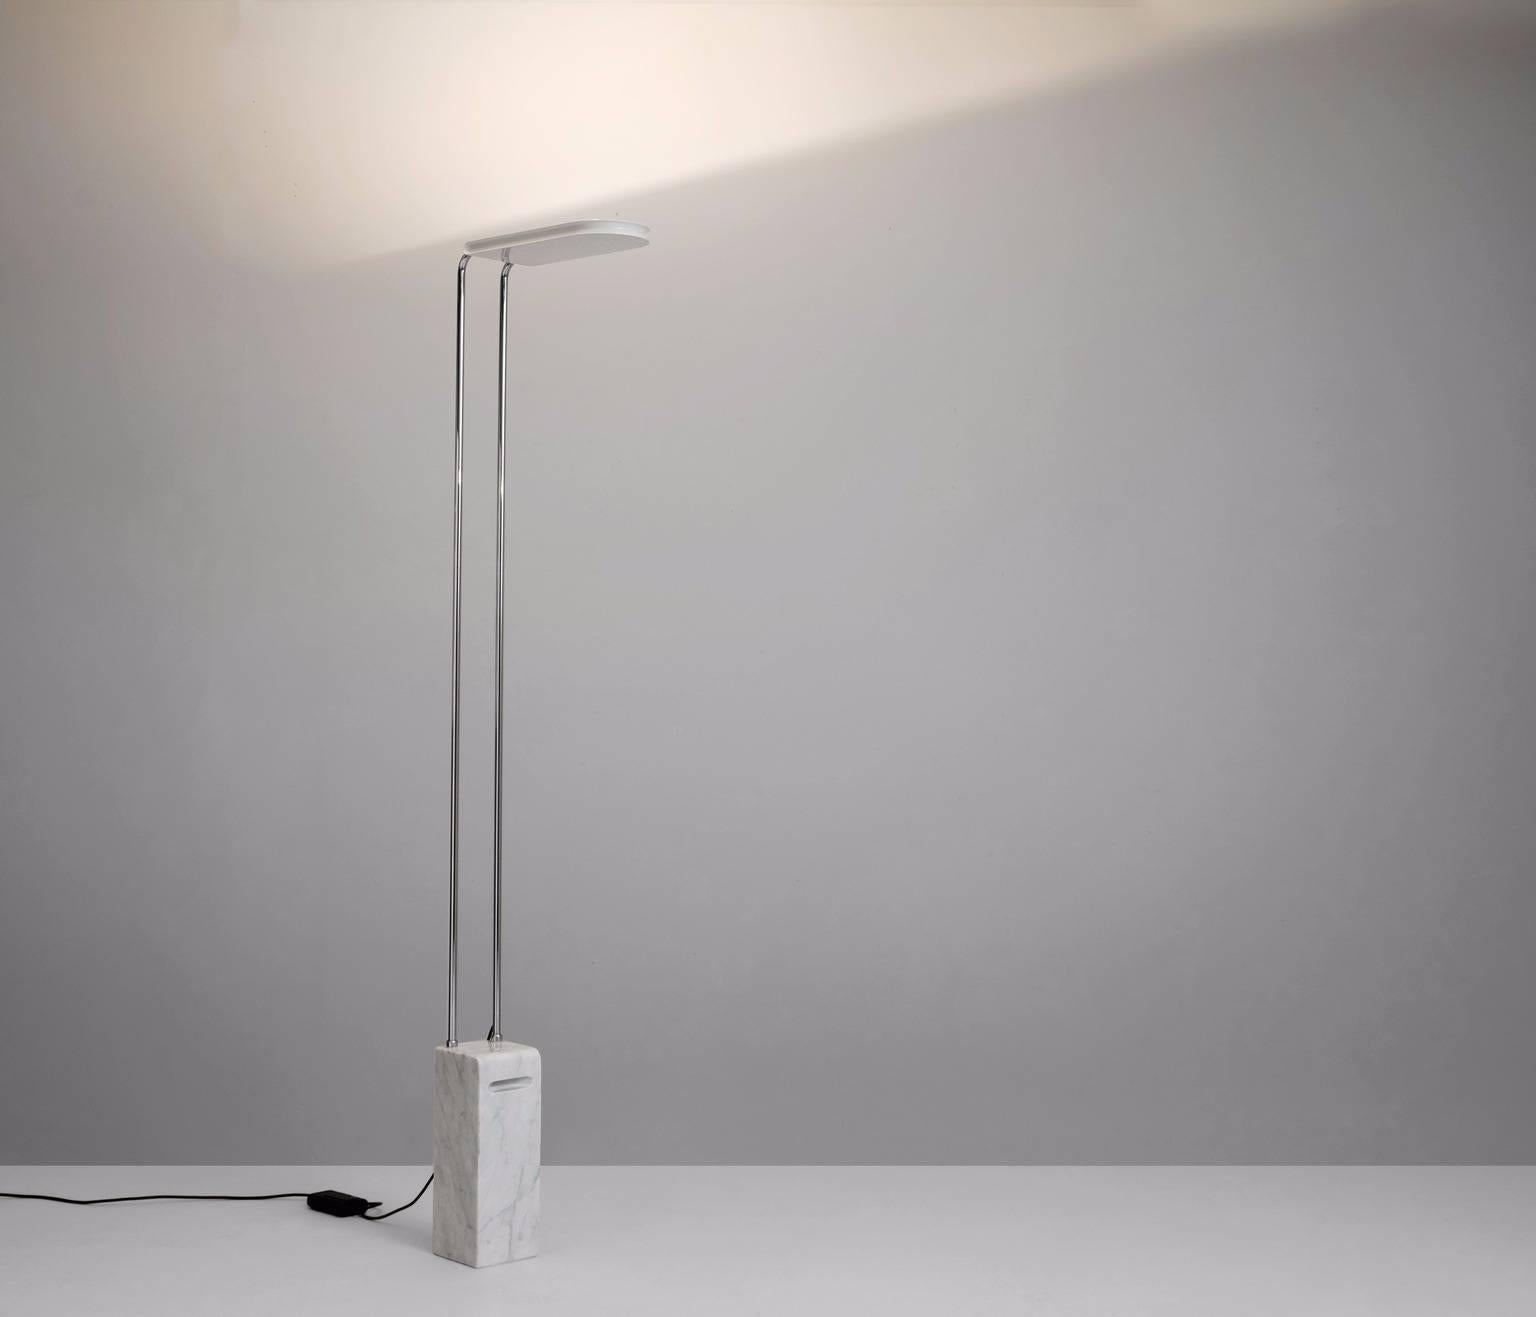 Floor lamp 'Gesto Terra' in marble, steel and acrylic, Italy, 1974. 

Elegant floor lamp with marble base. The frame is from tubular steel. This is an uplight, which means the lux is on the upside of the lamp. In this way the halogen light gets